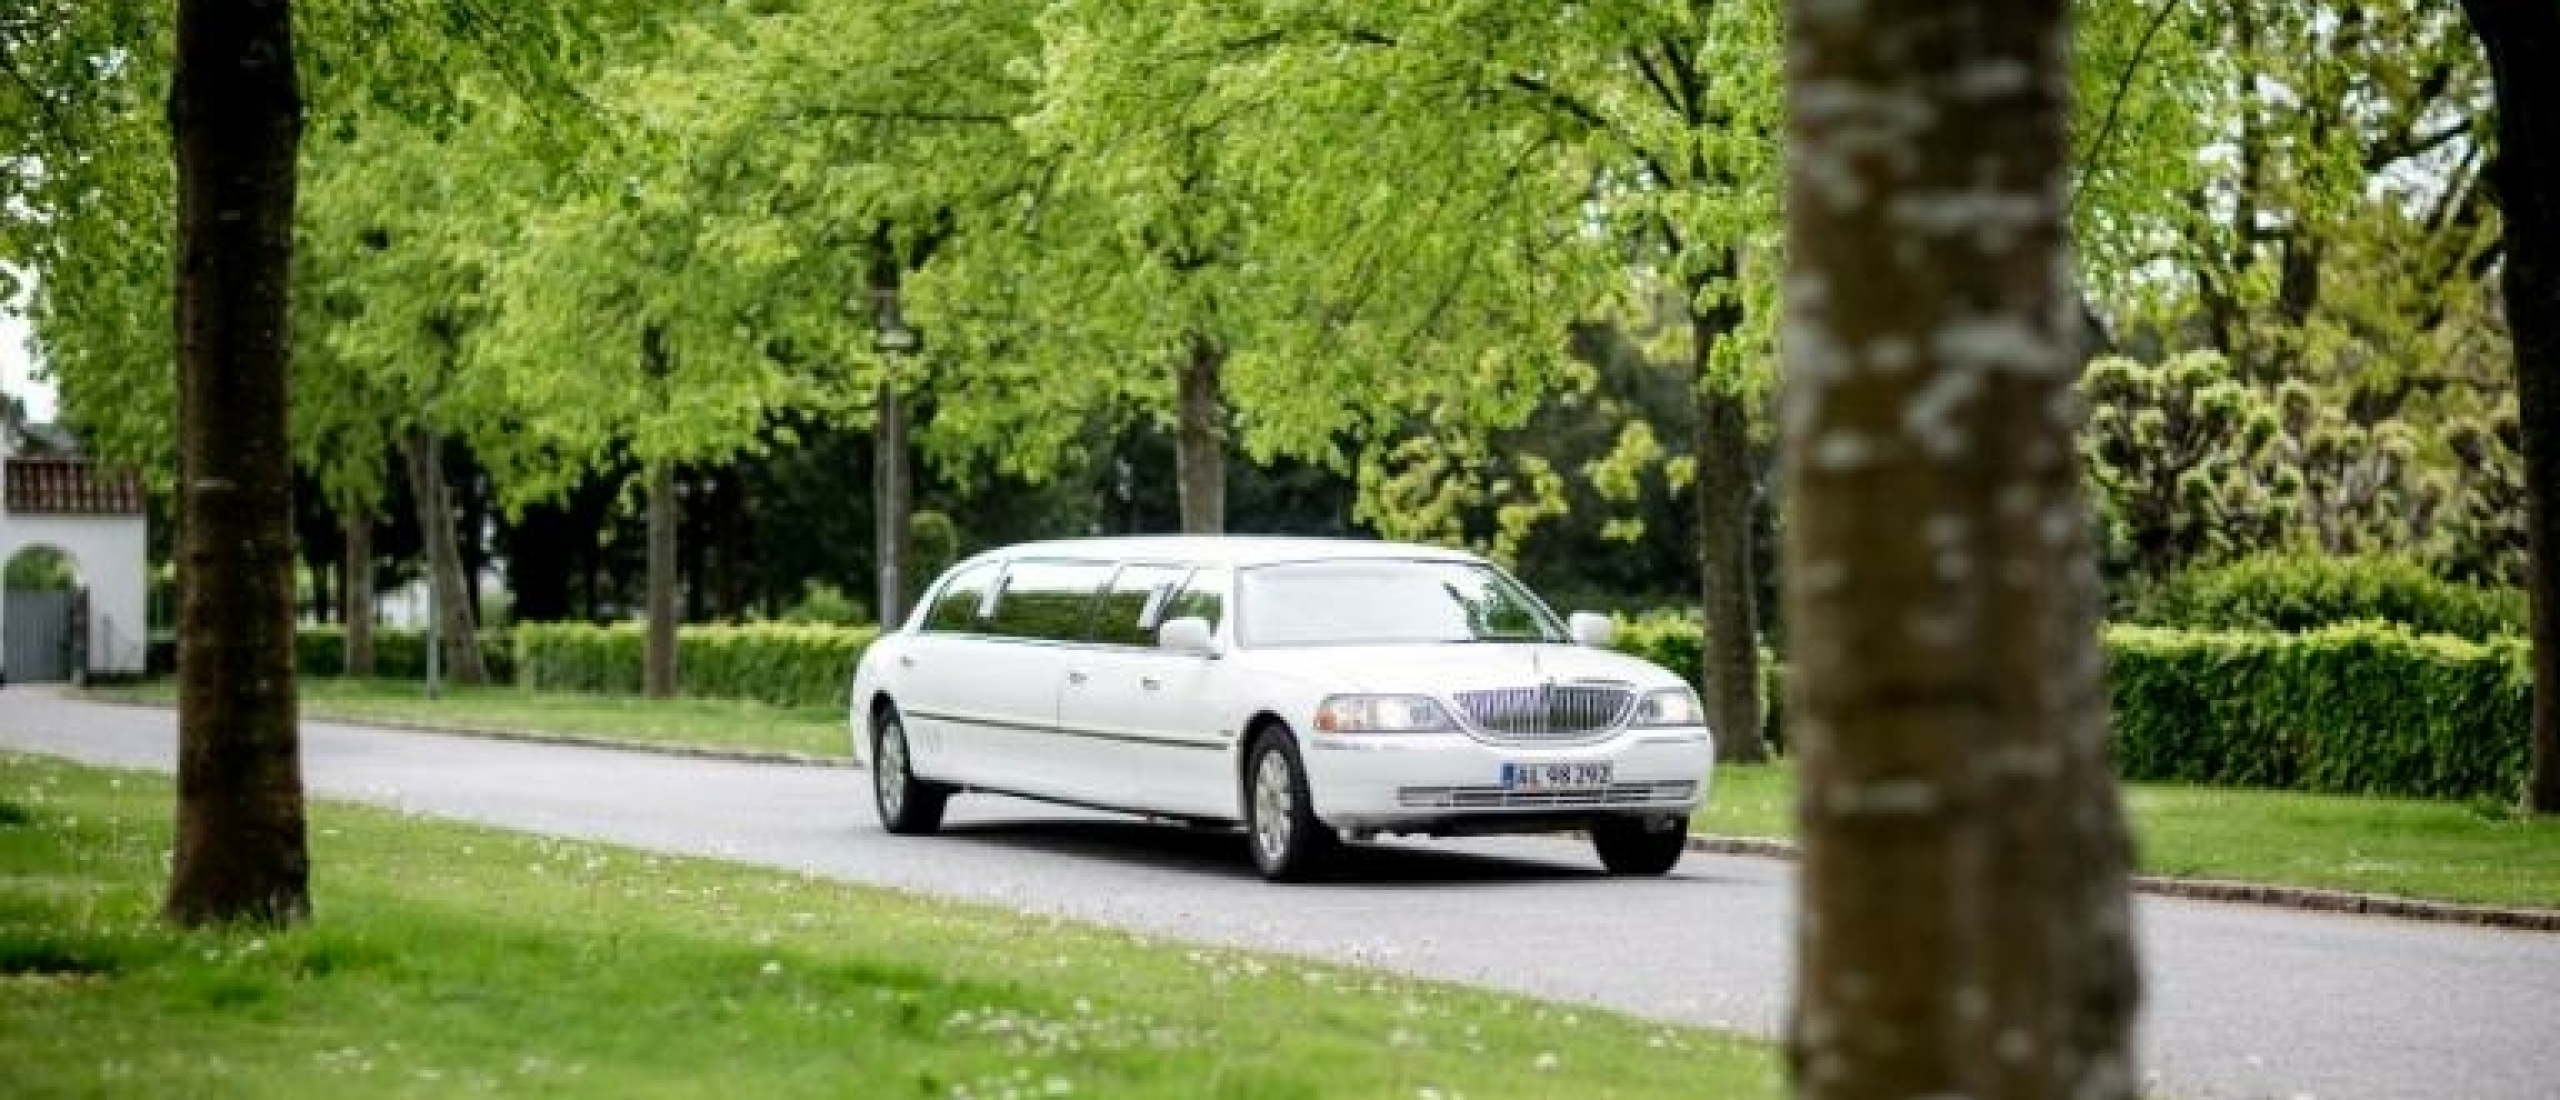 Reasons to Book a Limousine for Wedding Day